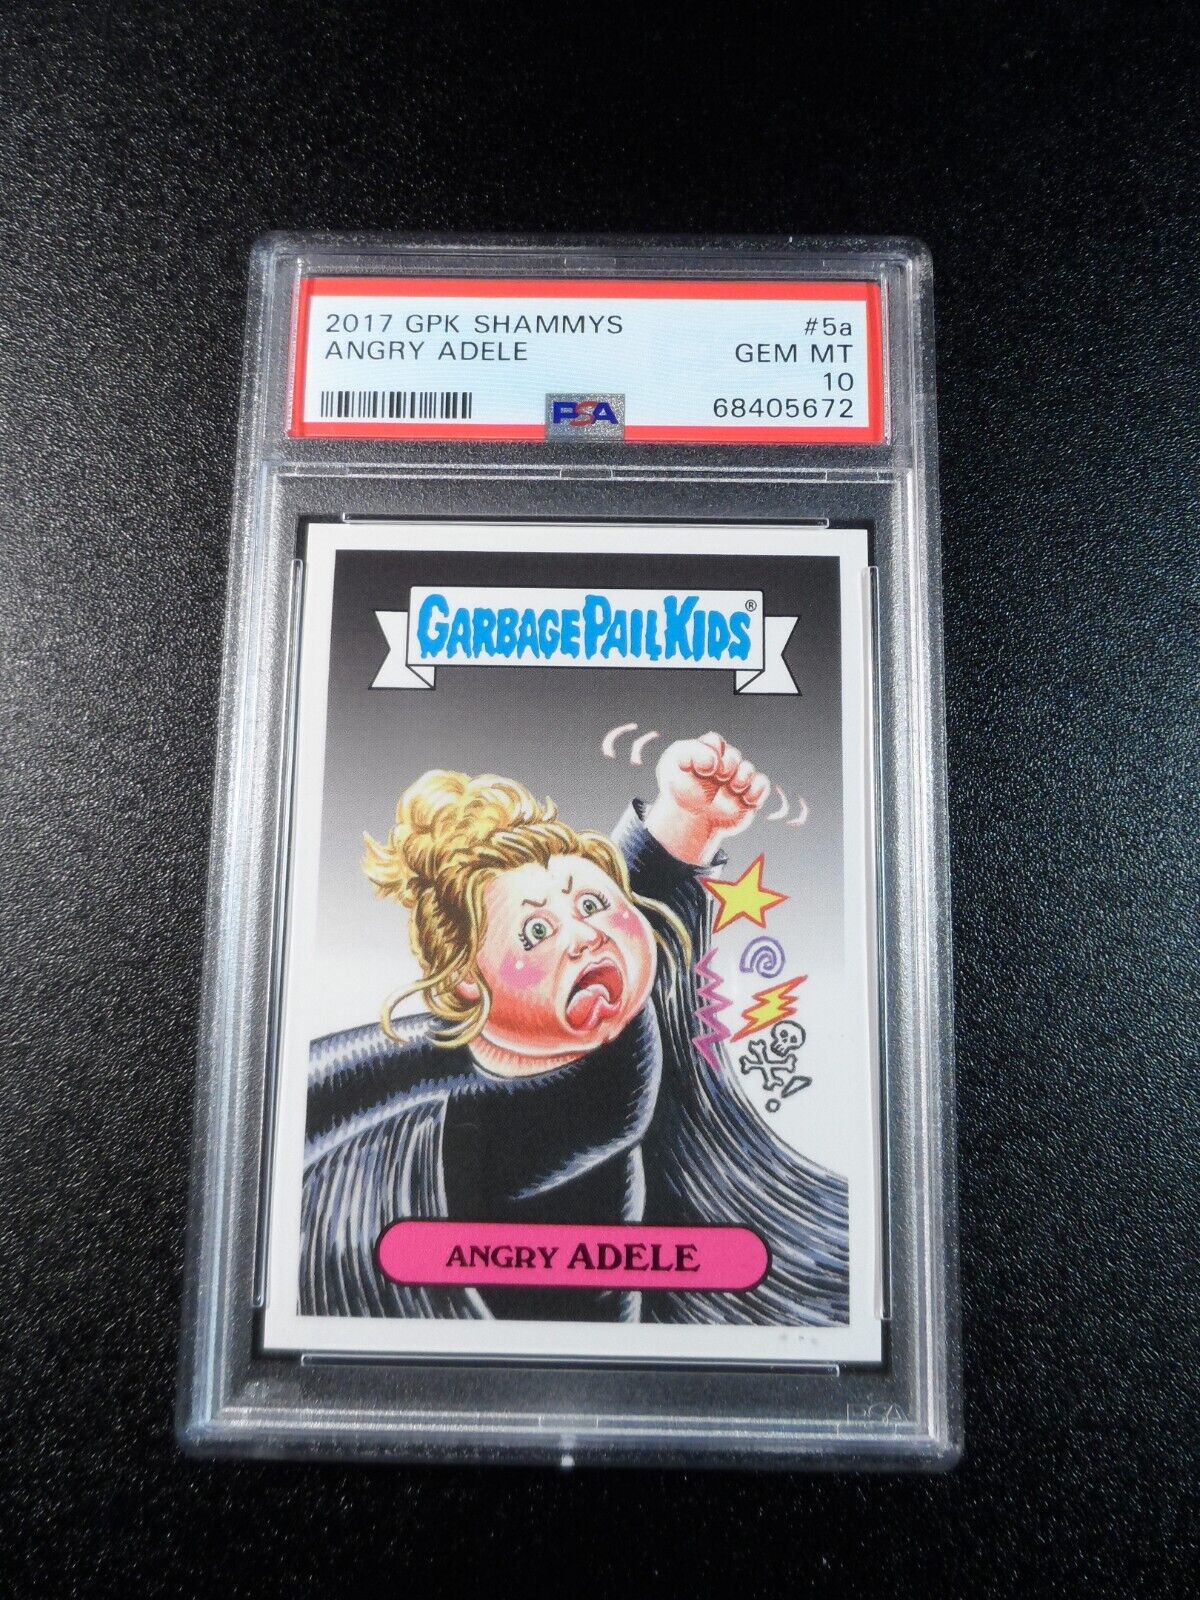 PSA 10 Angry Adele Spoof Hello Skyfall Garbage Pail Kids 2017 Shammy\'s Card